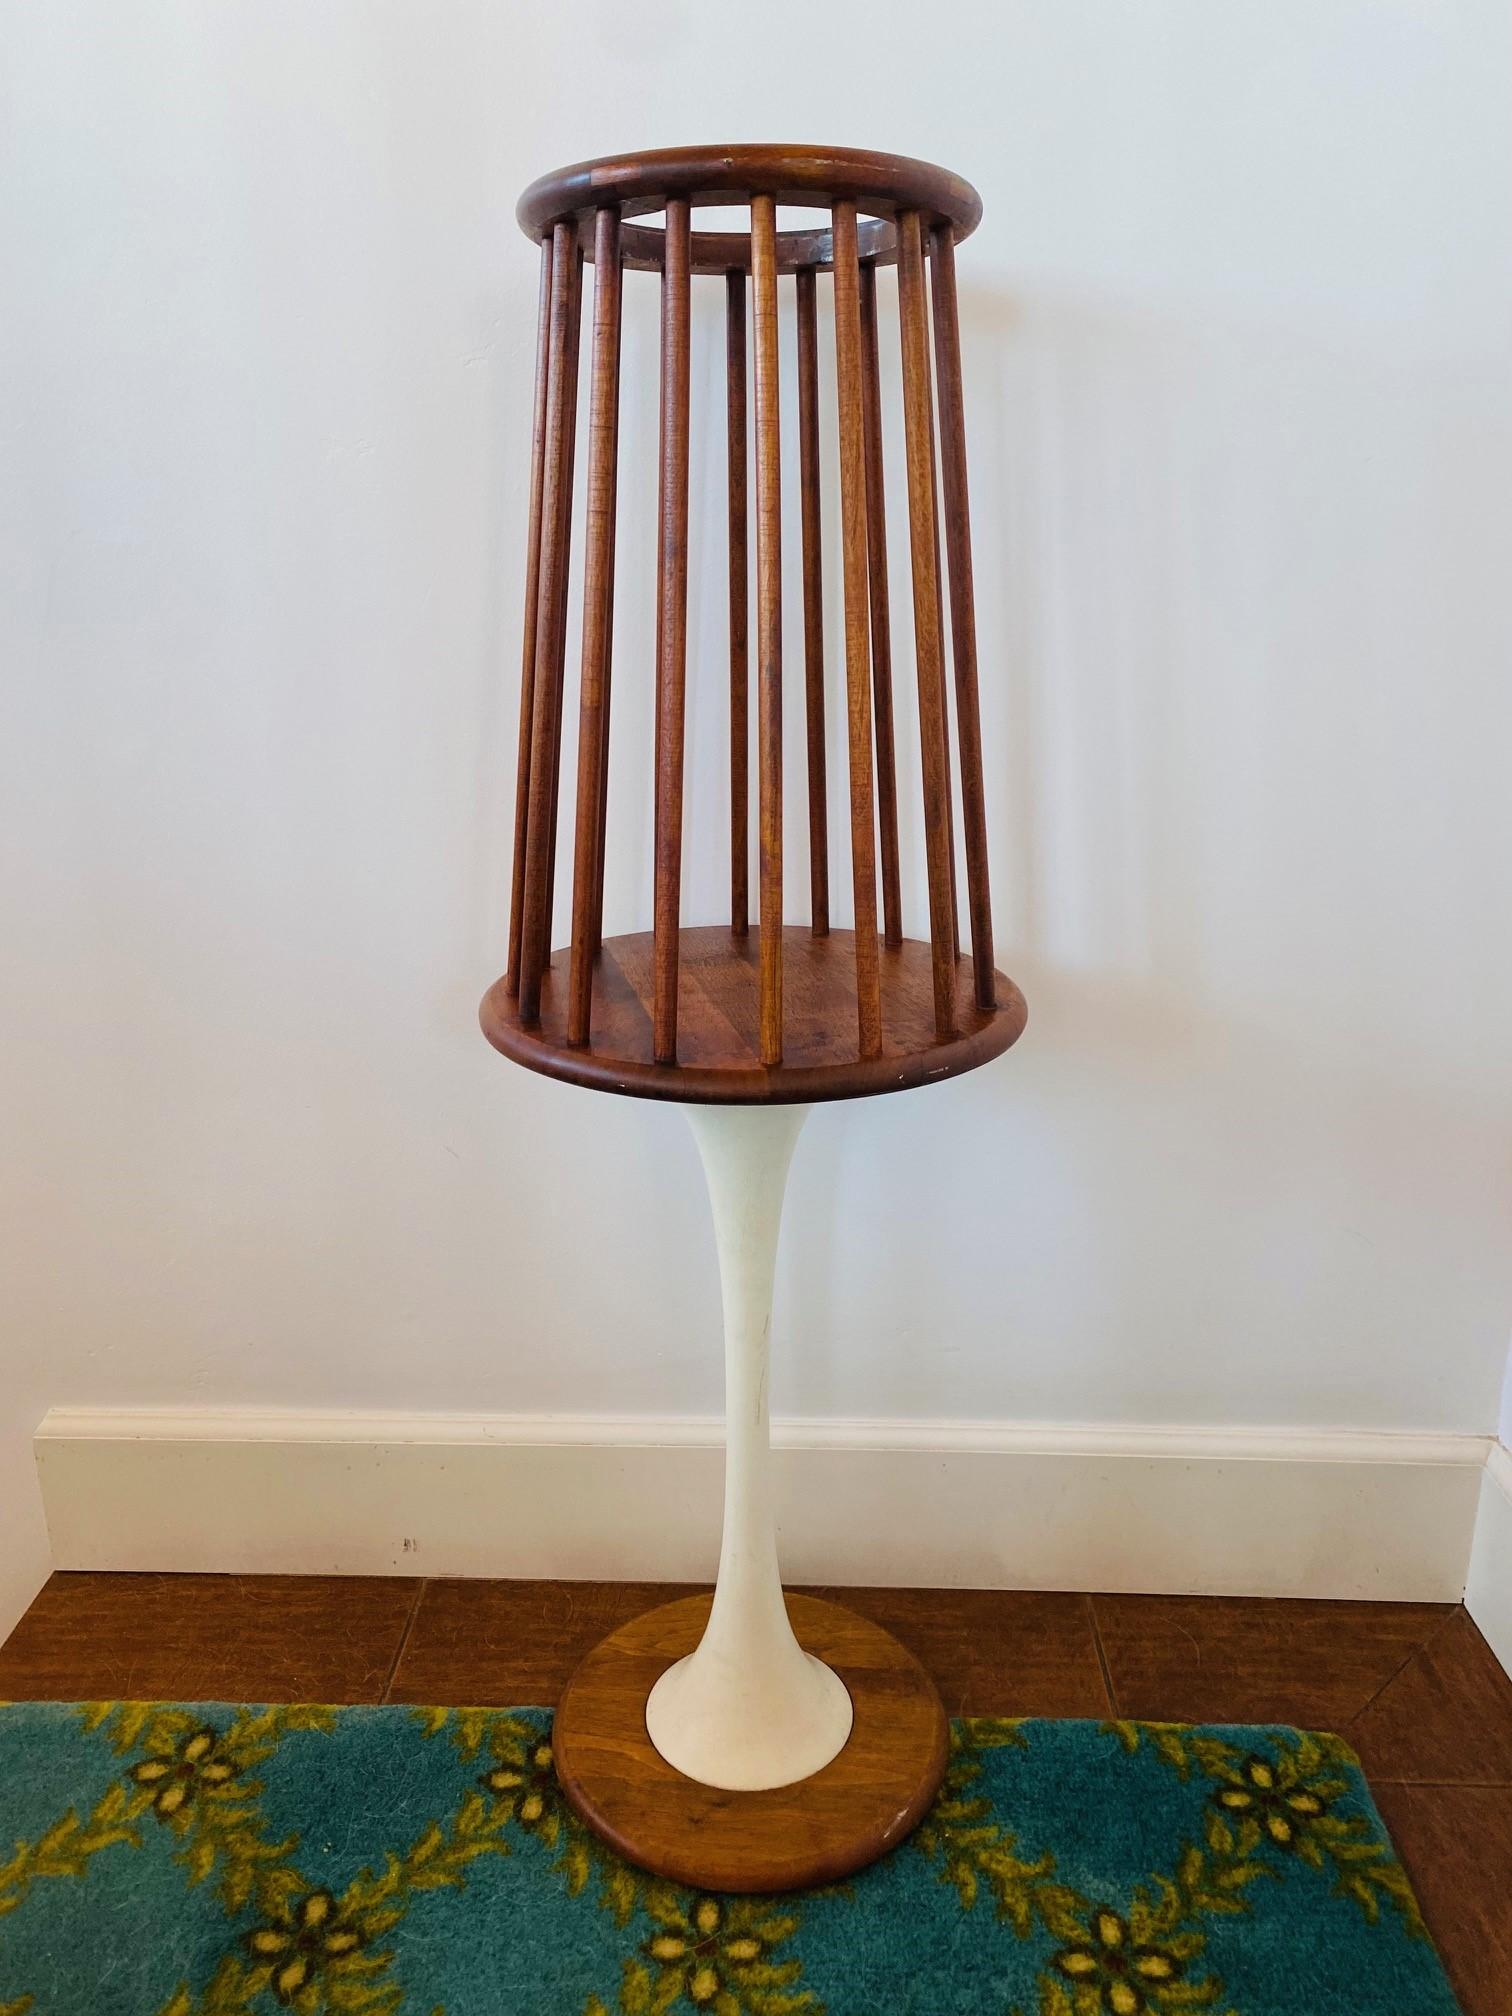 Incredible tulip based vintage planter .  This piece is sculptural and epic.  A tulip style base holds a planter base that is sculpturally created of wood rods.  The end result is a piece that evokes style and Mid Century sensibility.   Utility that